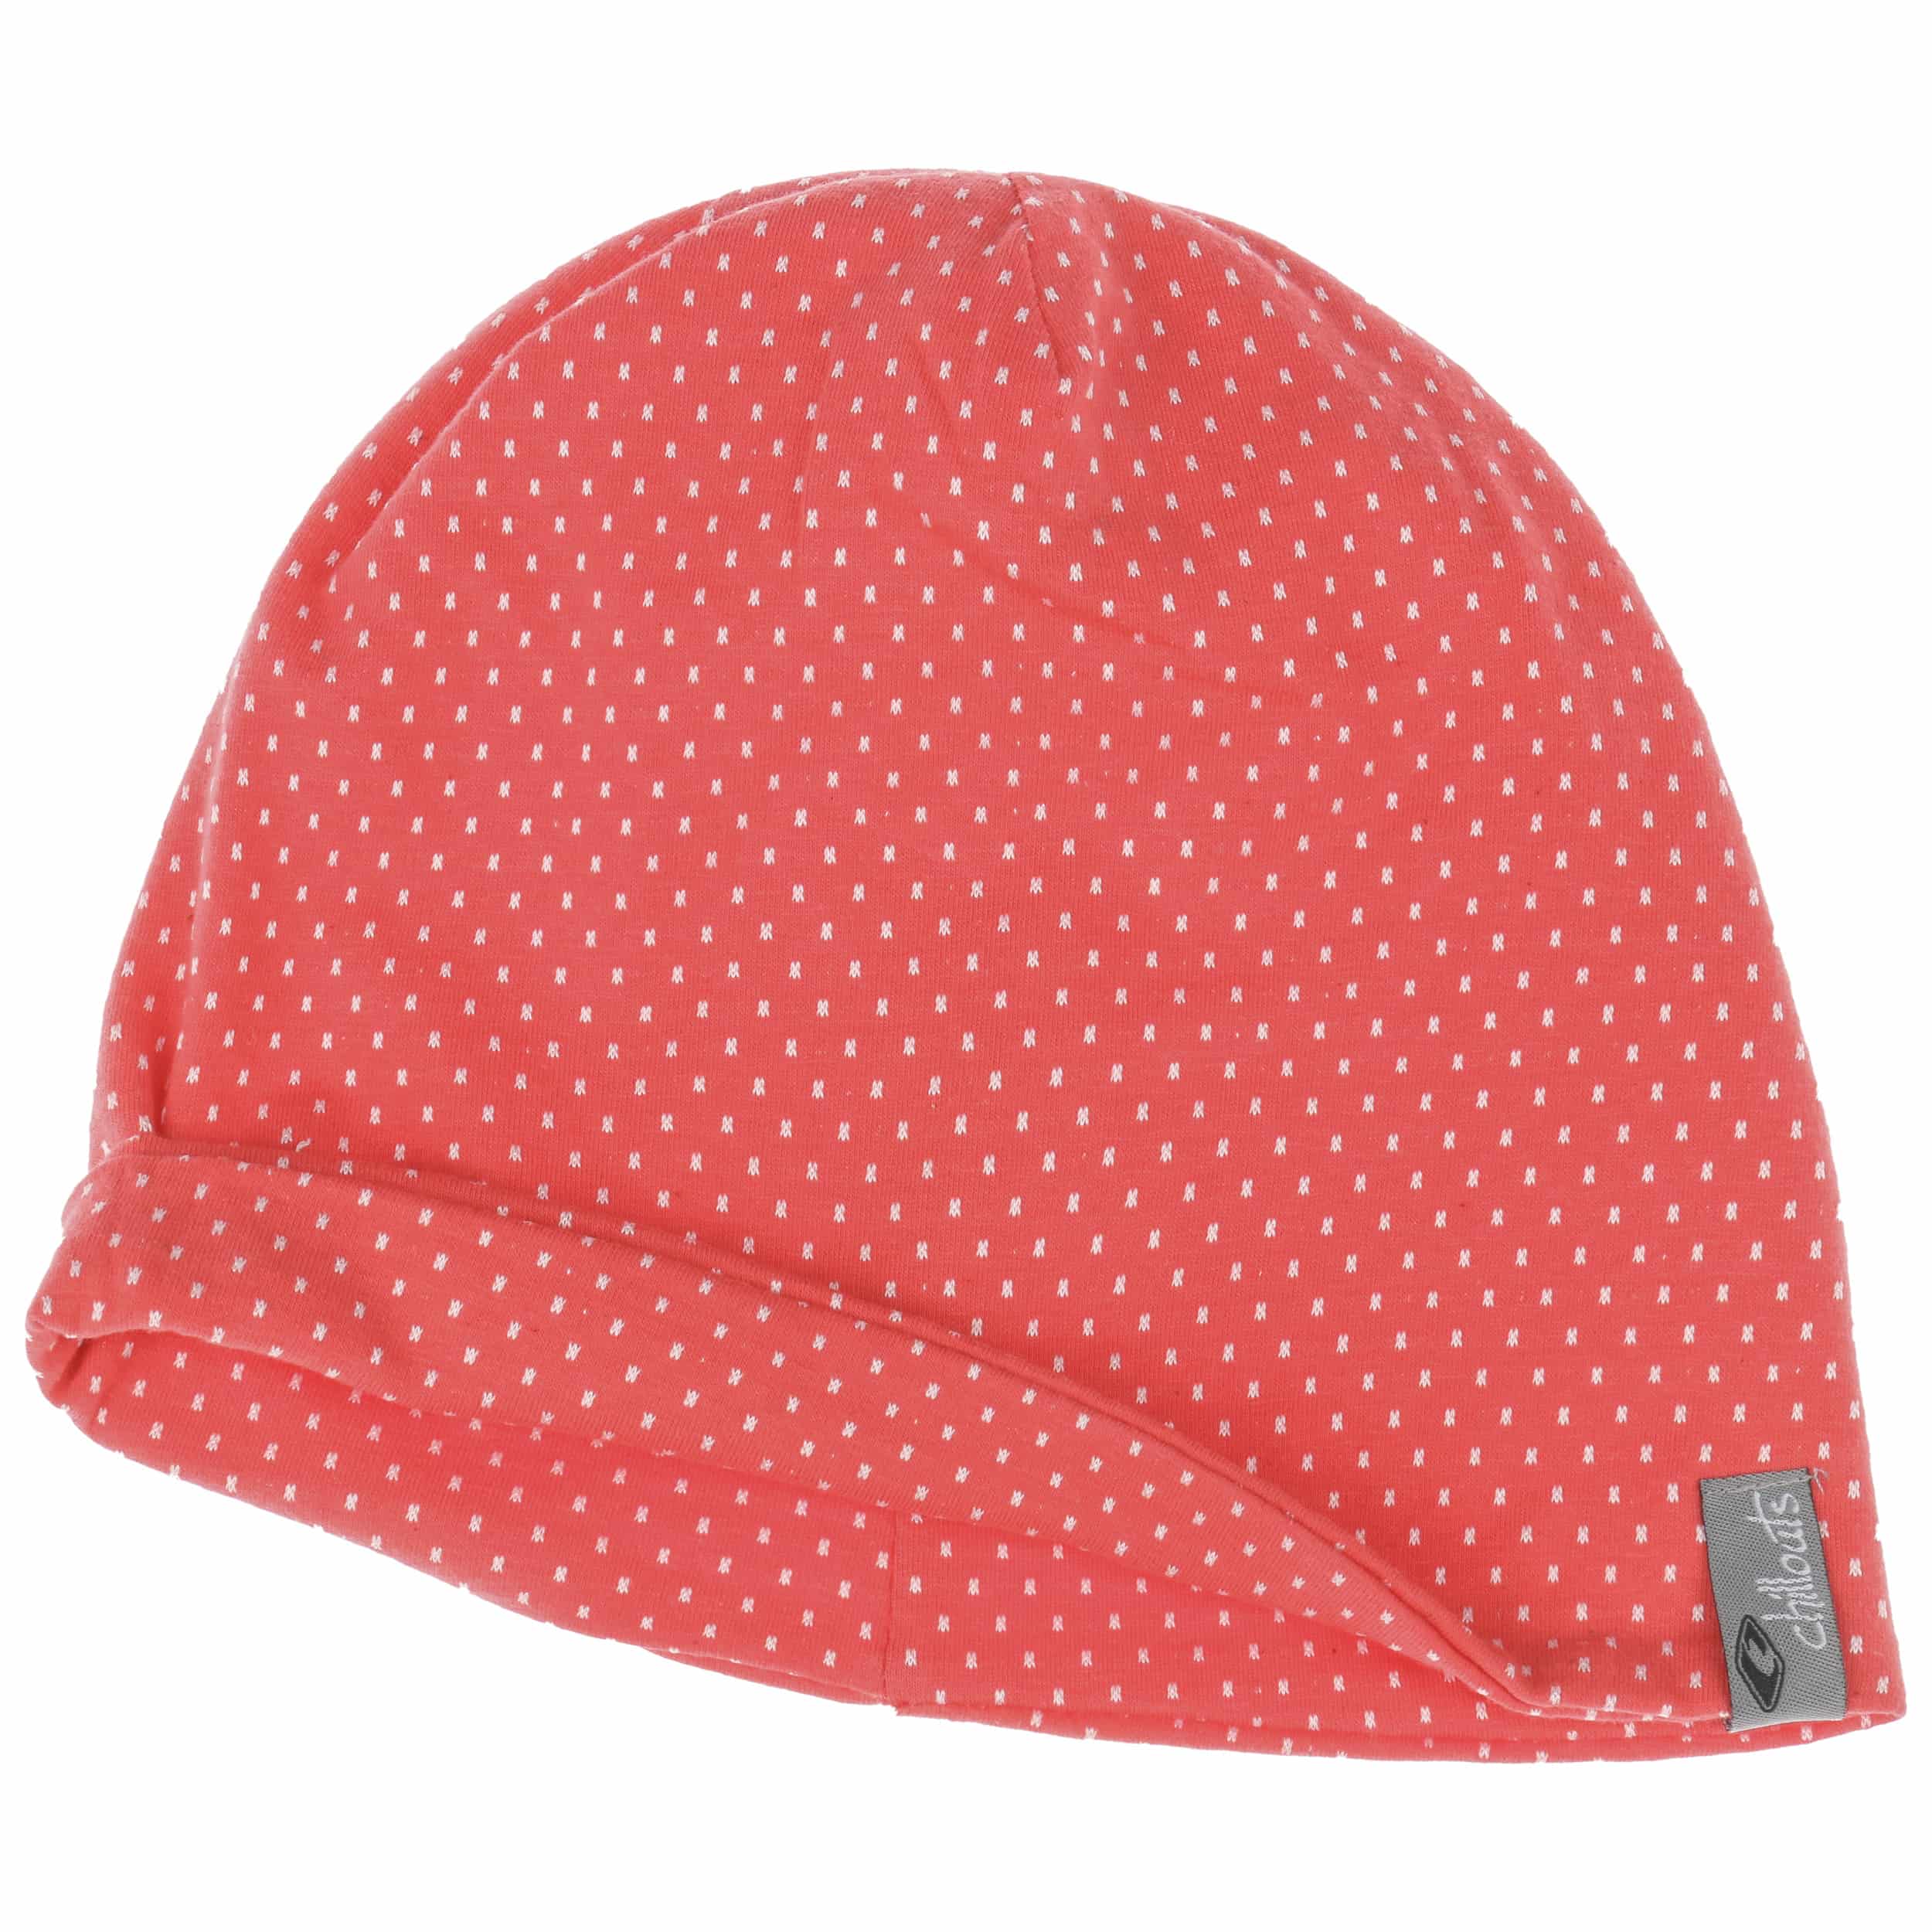 - 22,99 Florence Beanie Chillouts by € Oversize